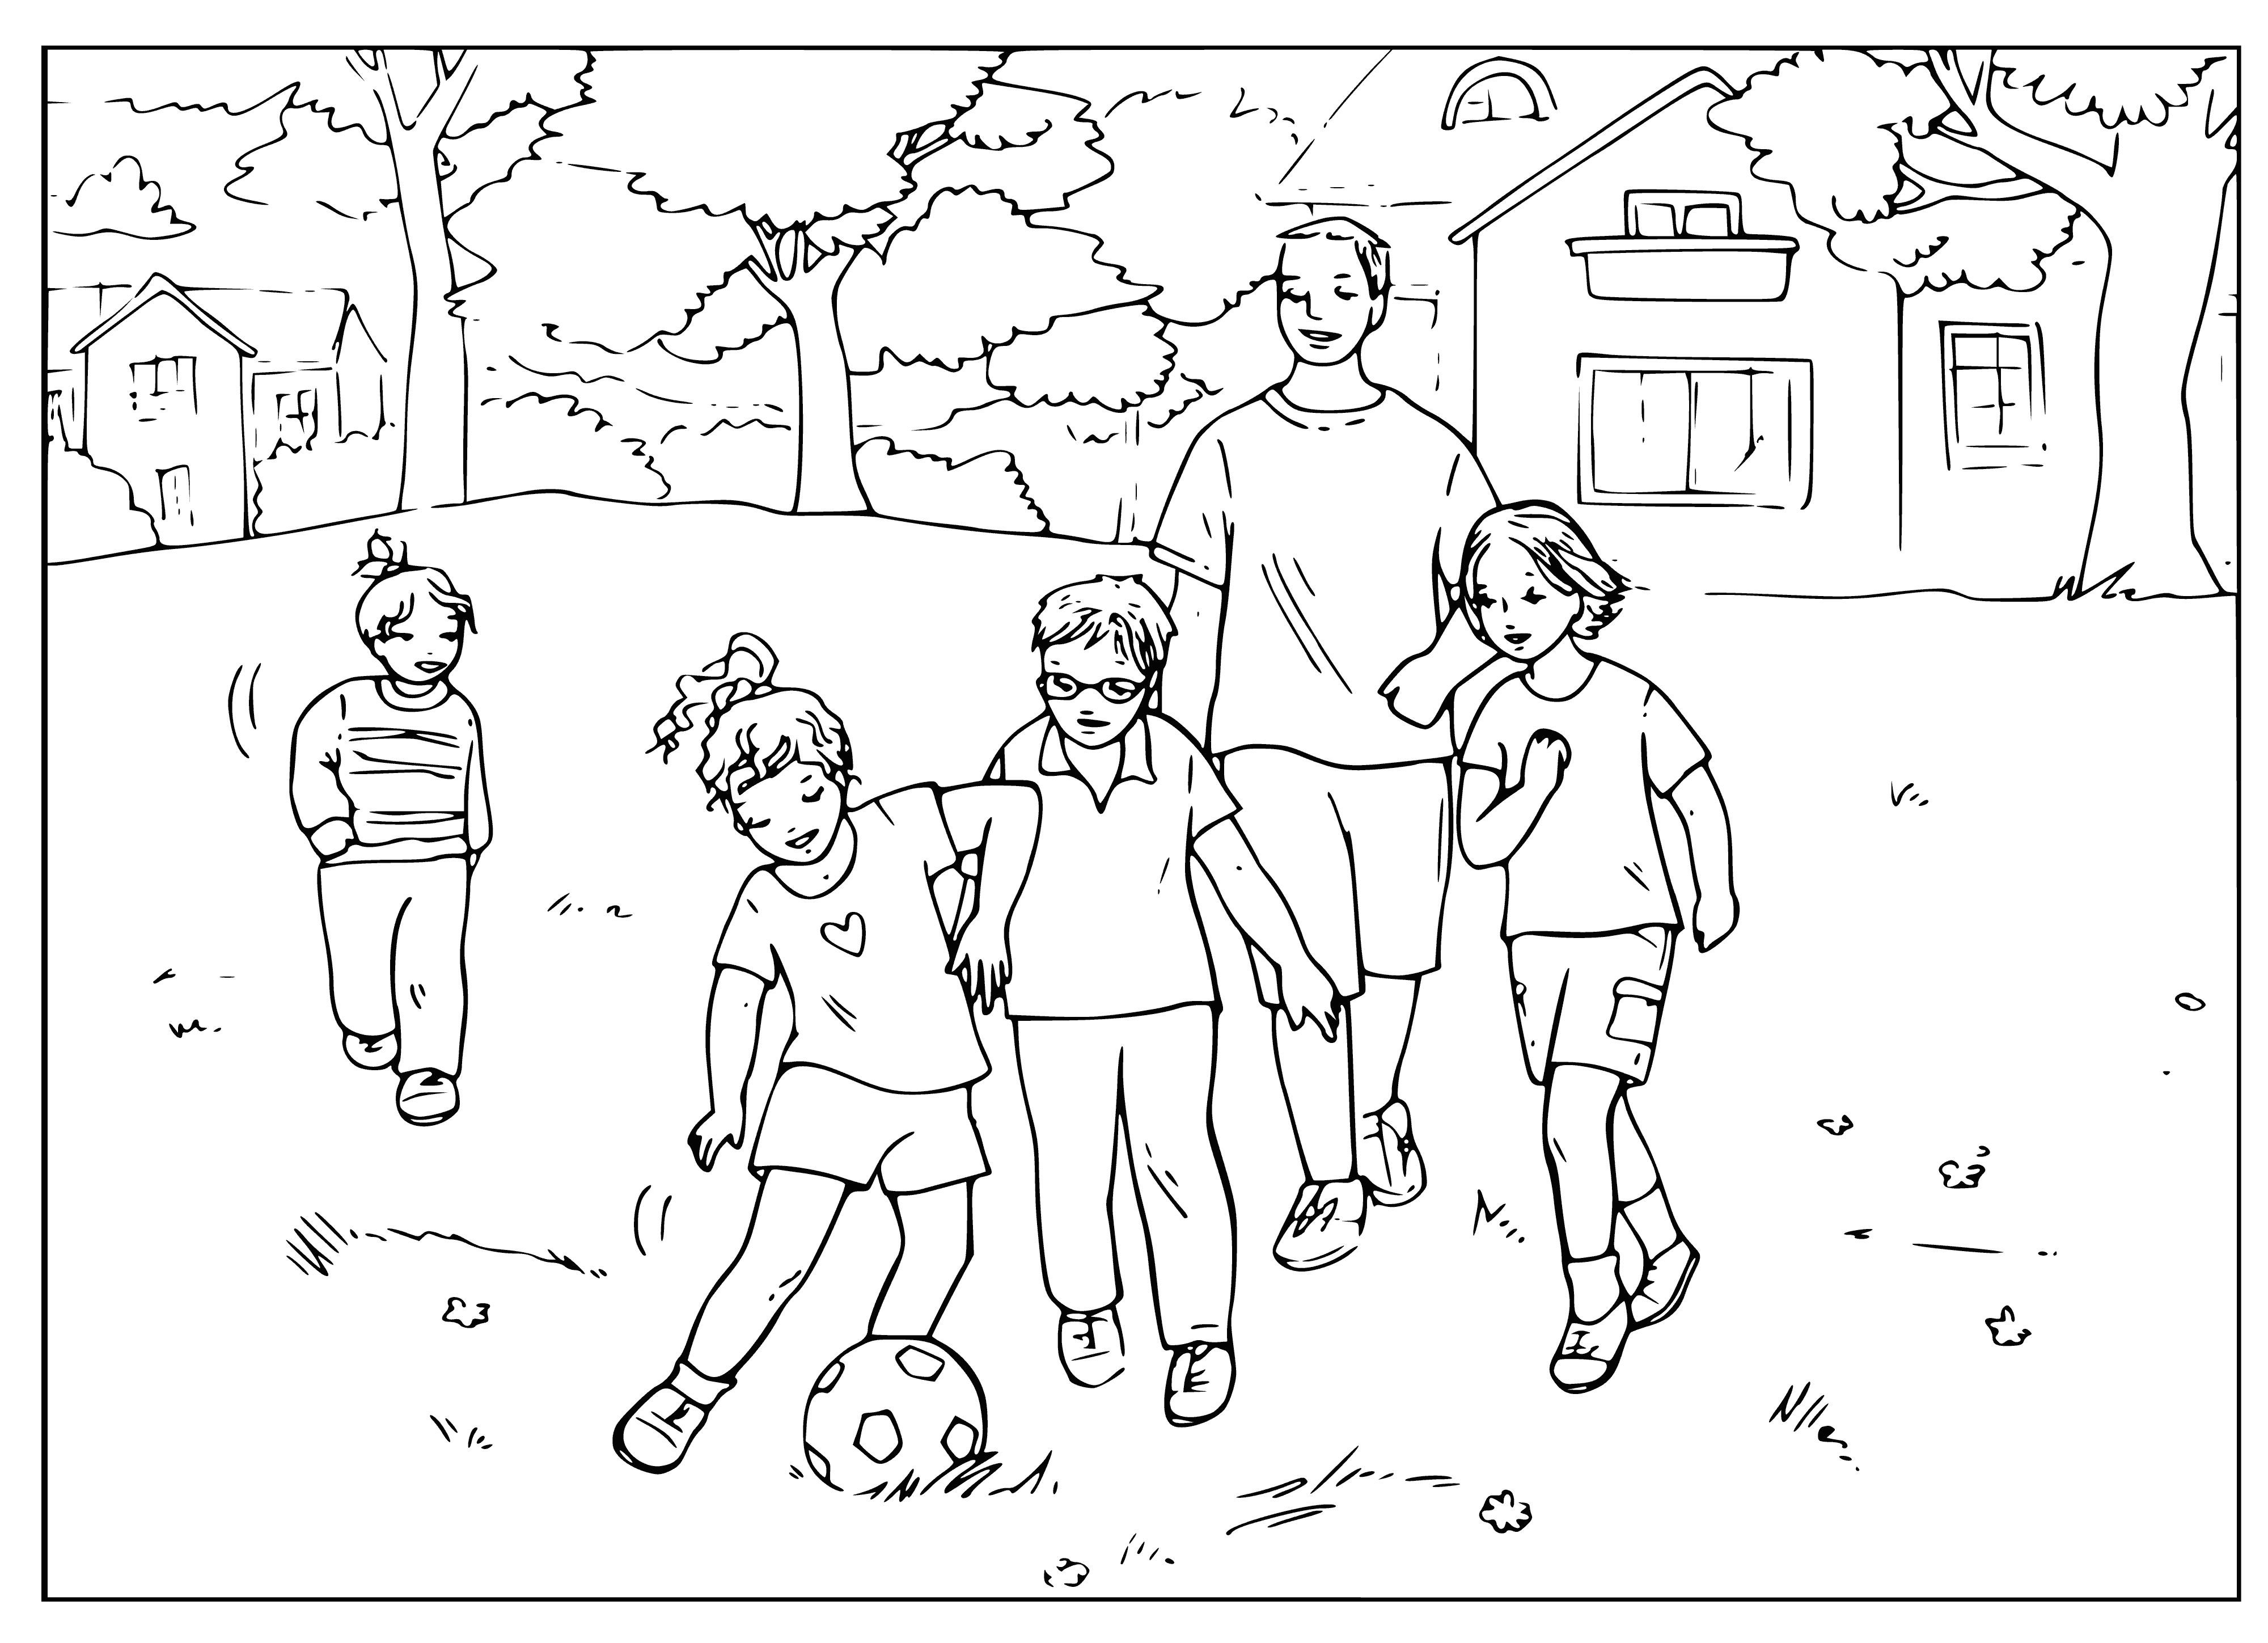 coloring page: Two teams of 11 players wearing their colors playing to score by getting the ball into the opposite goal.